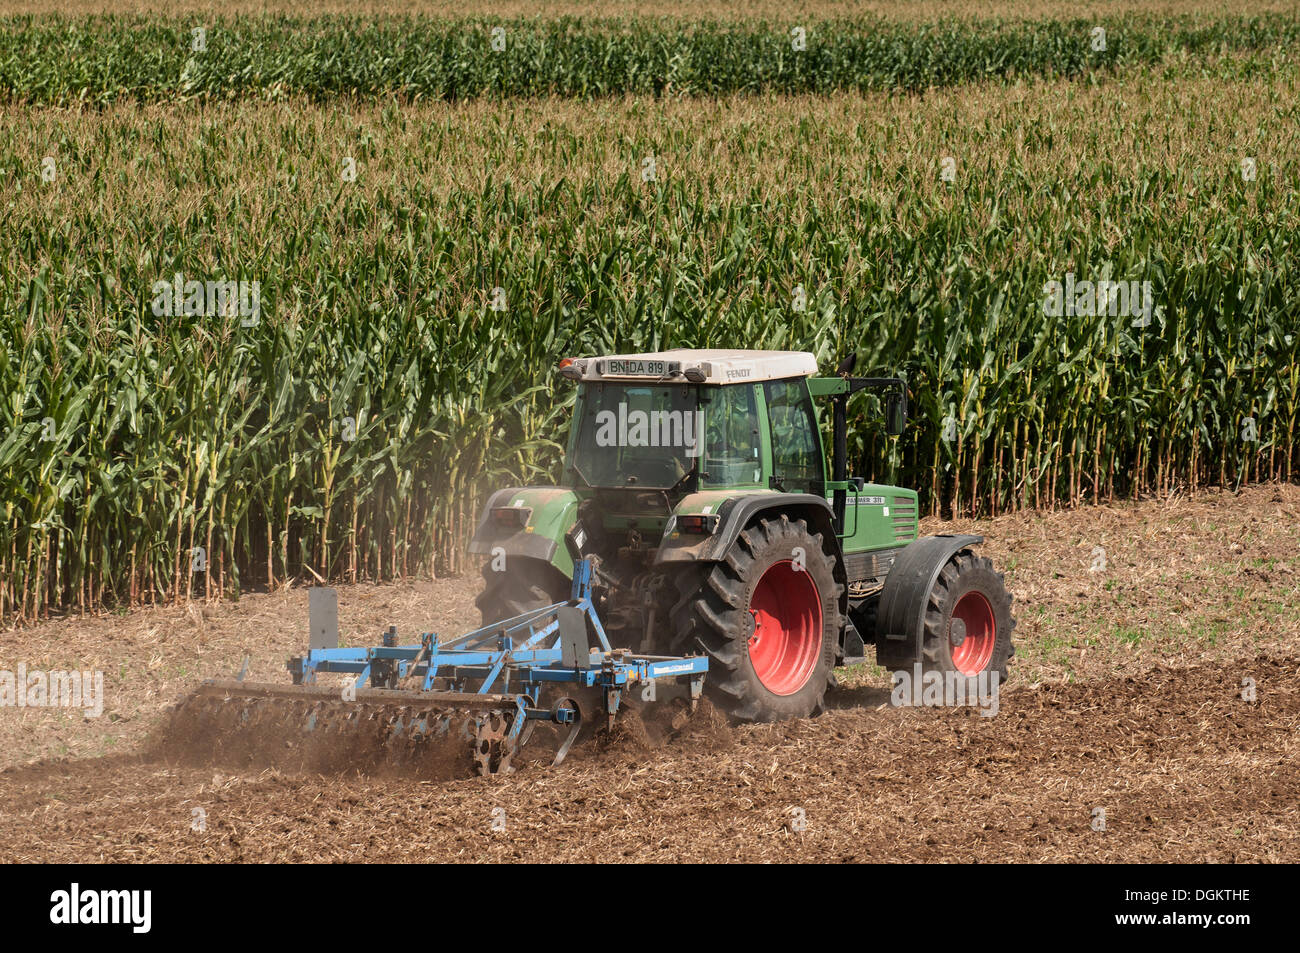 Tractor with a cultivator in front of a field of Corn (Zea mays subsp. Mays), PublicGround Stock Photo